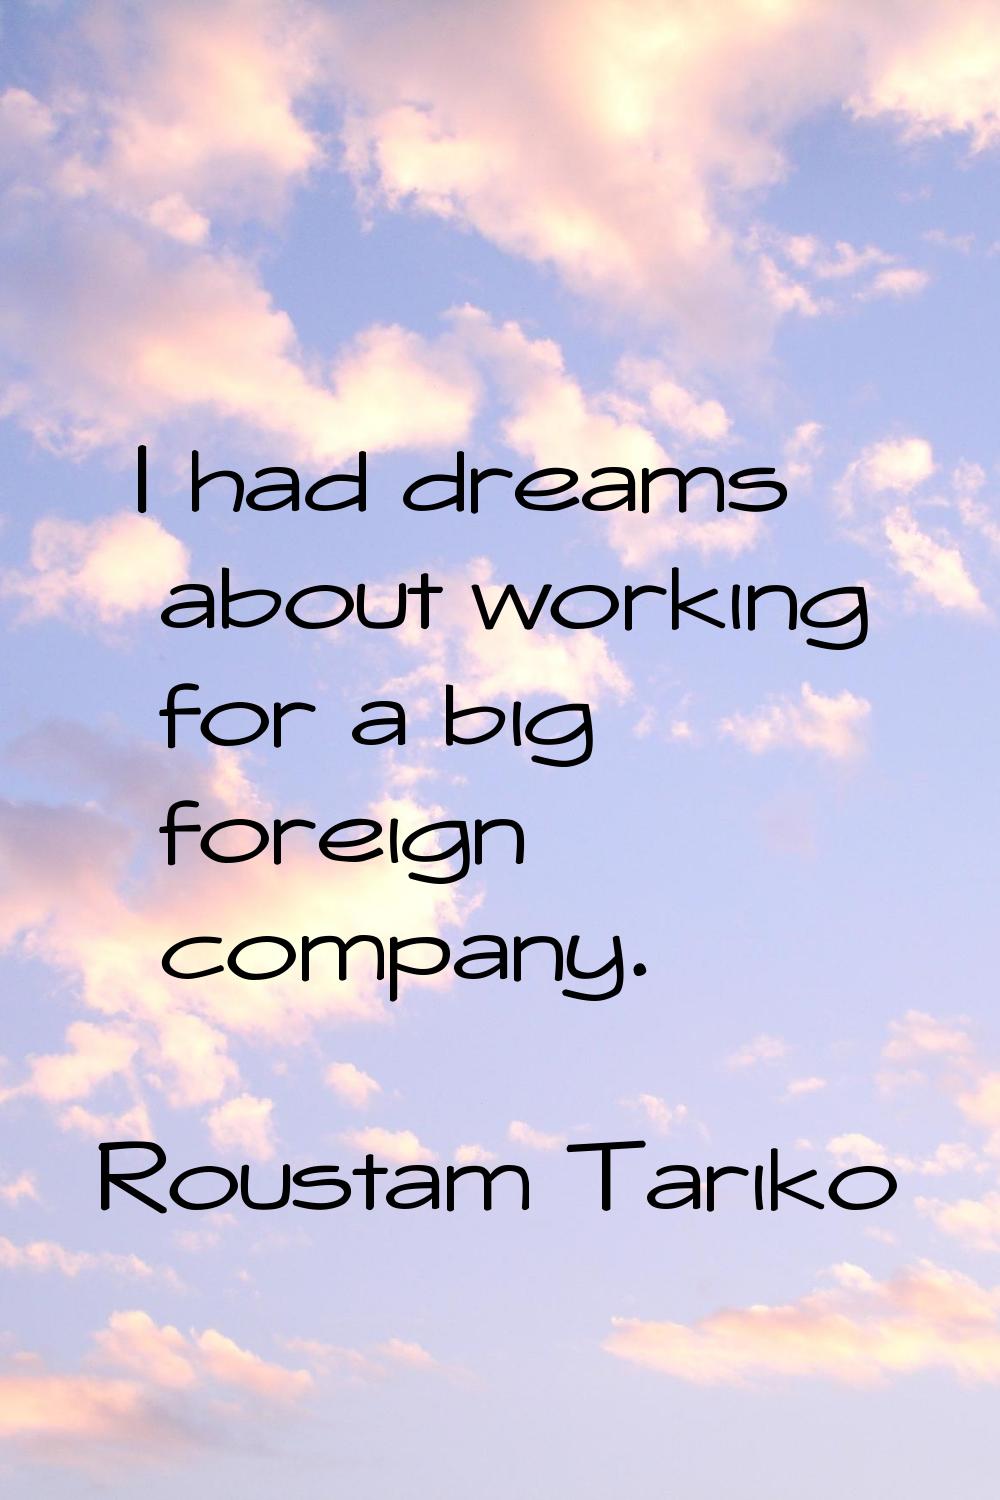 I had dreams about working for a big foreign company.